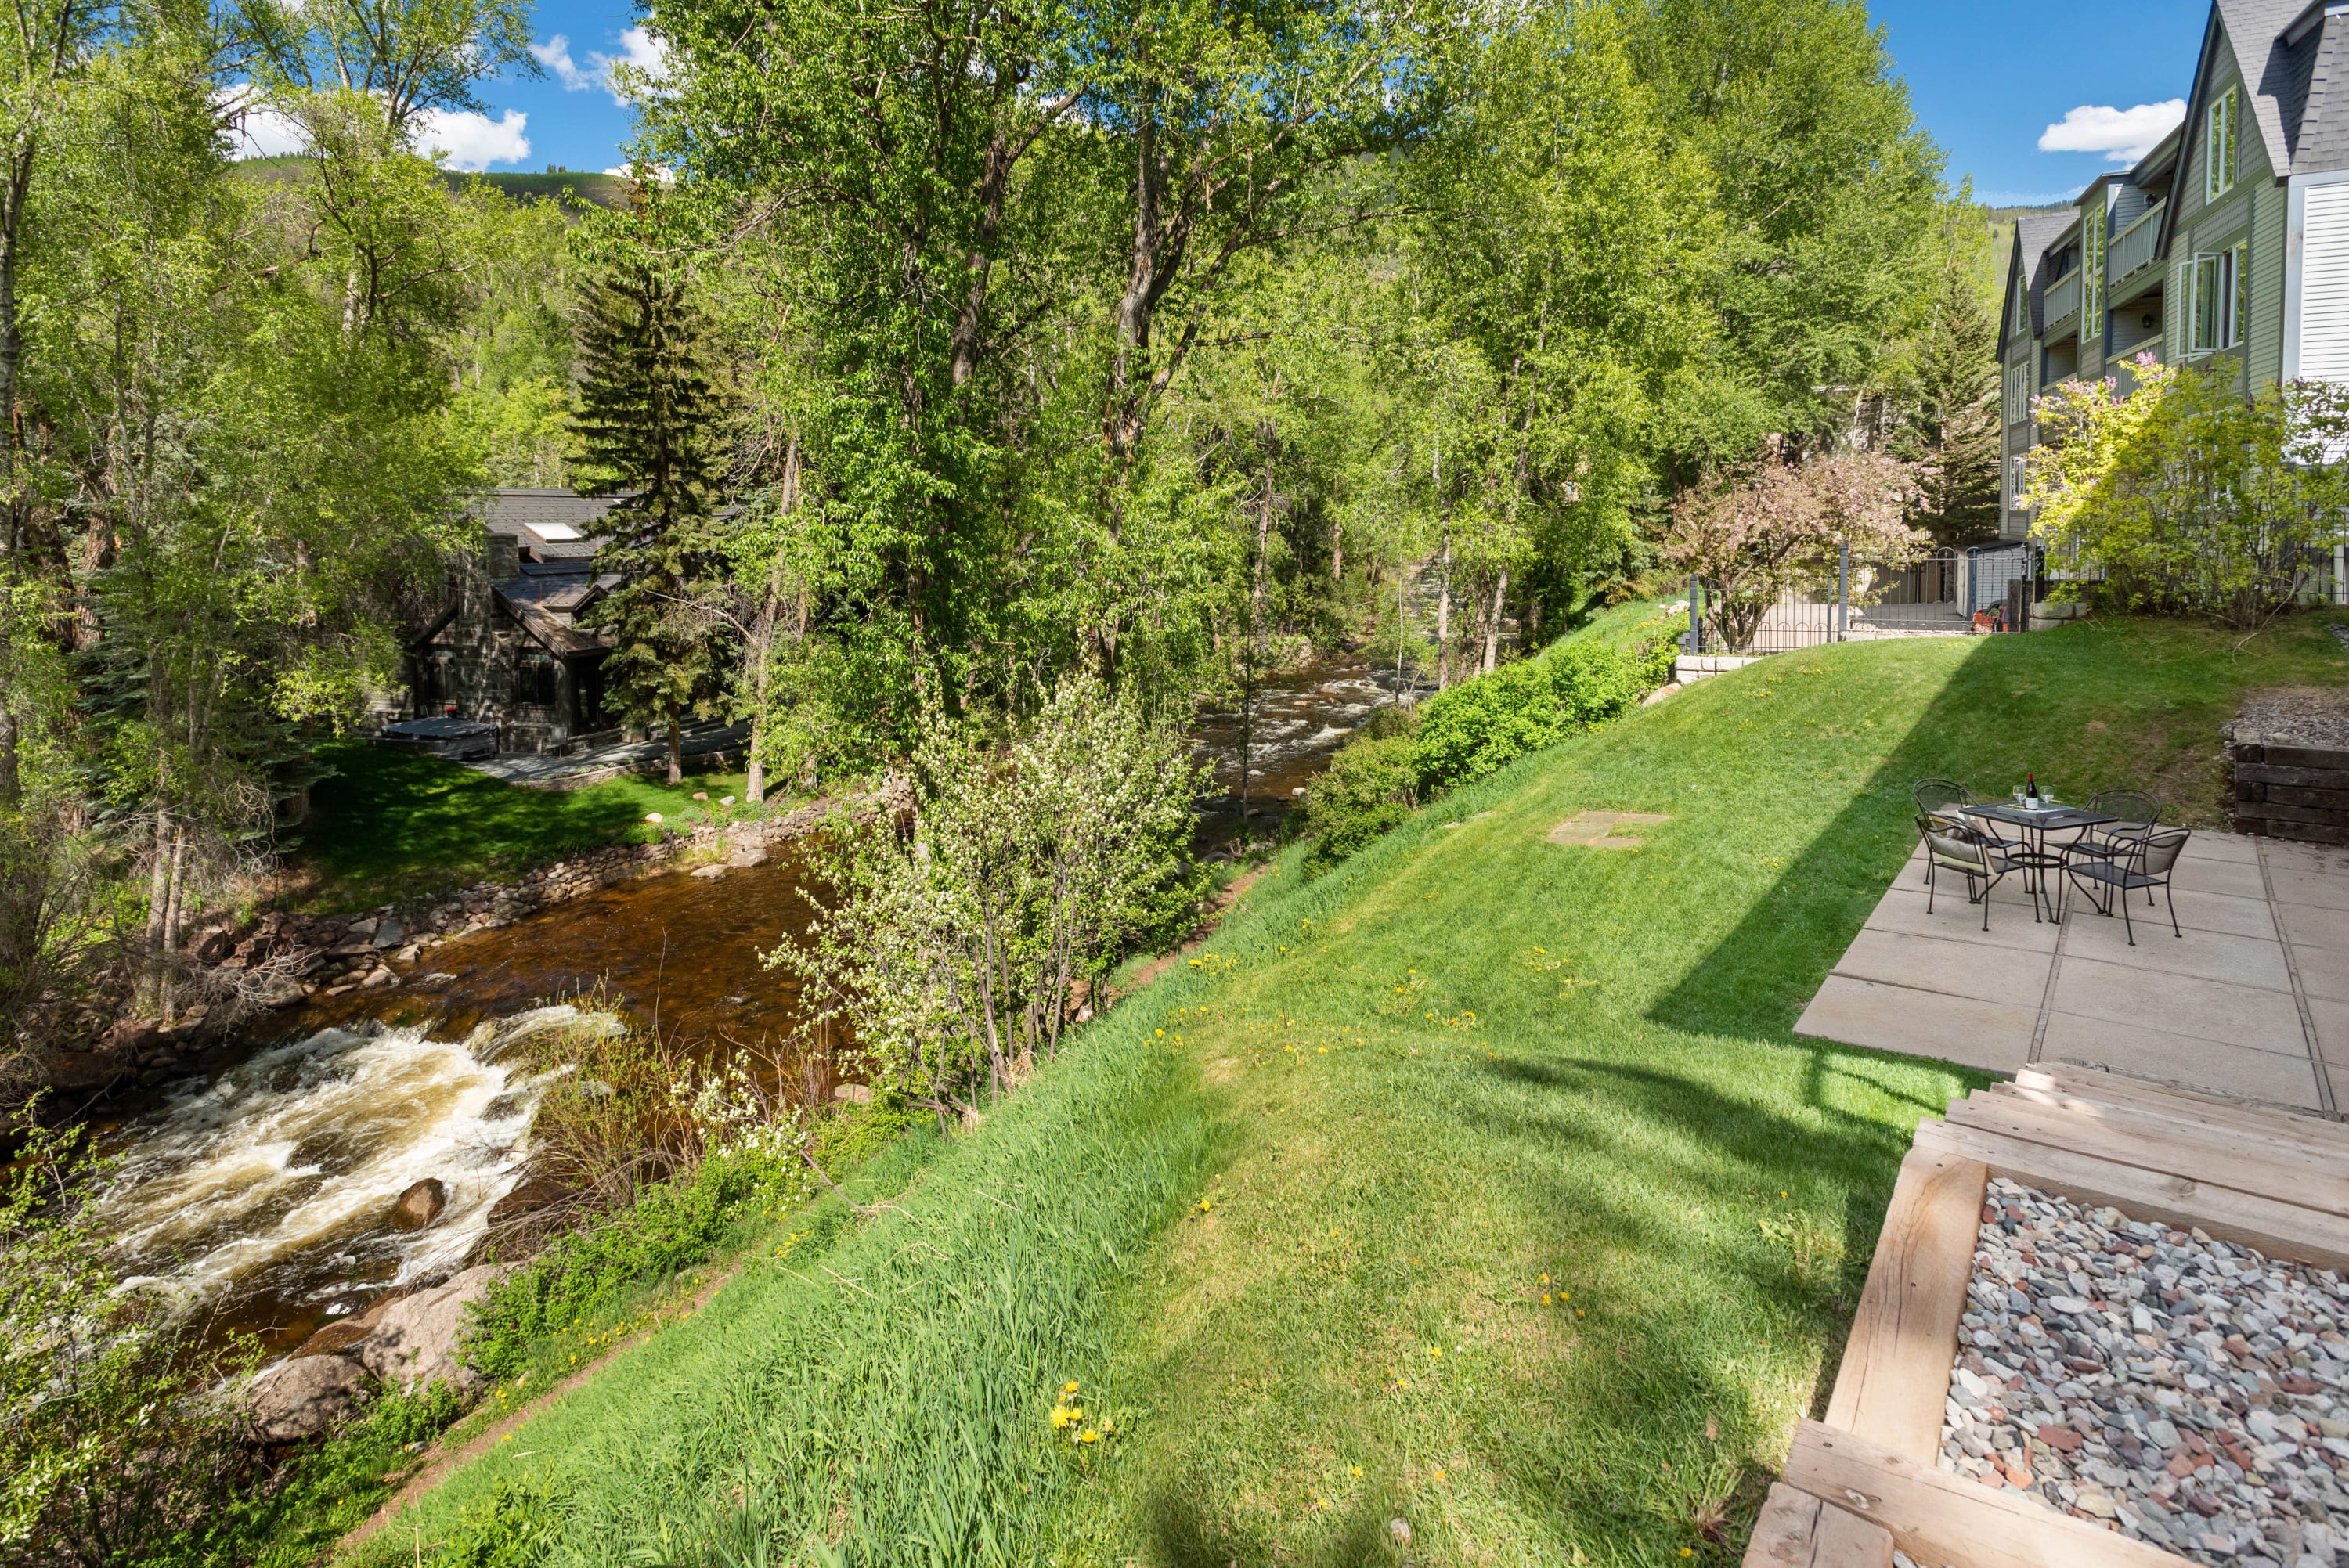 Stunning views of the Roaring Fork River below the balcony